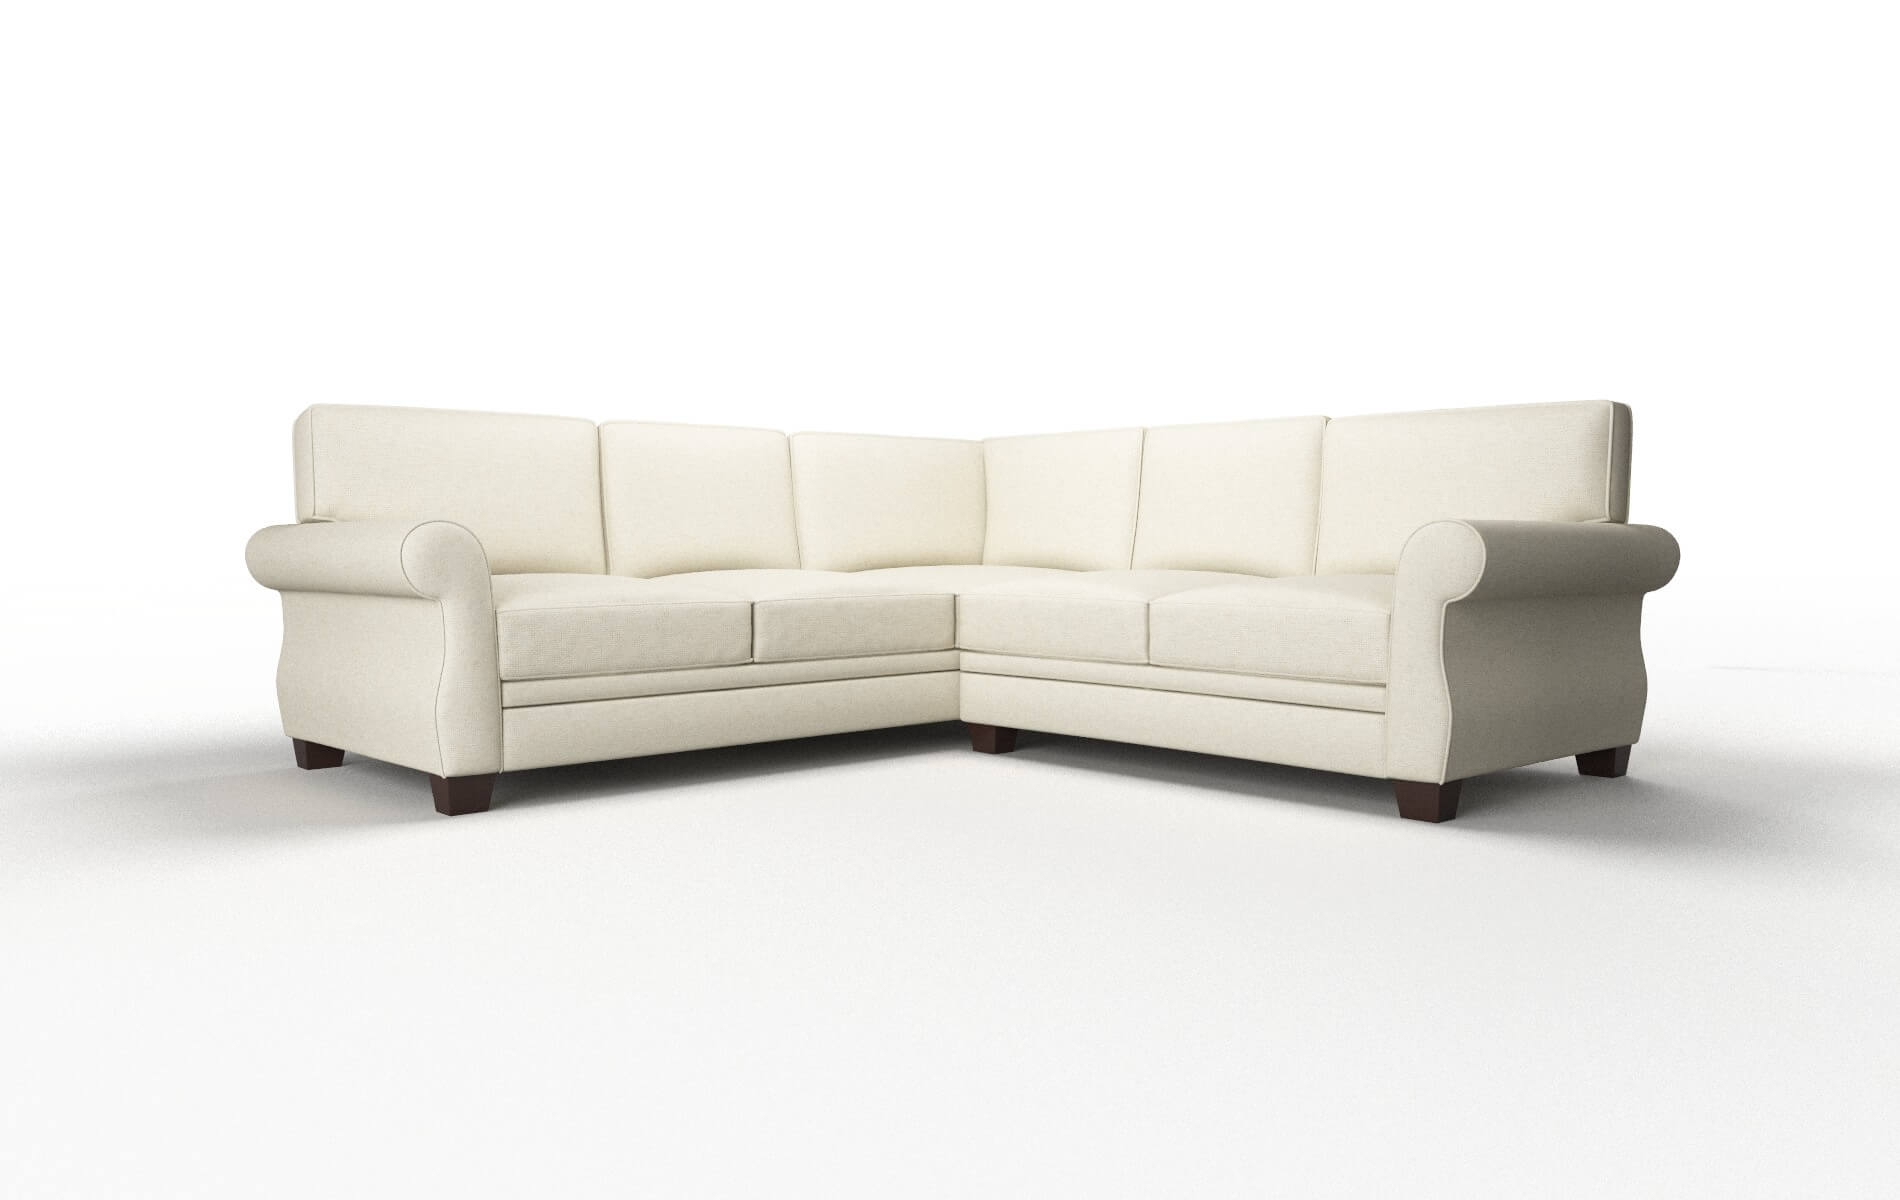 Rome Redondo Oyster Sectional espresso legs